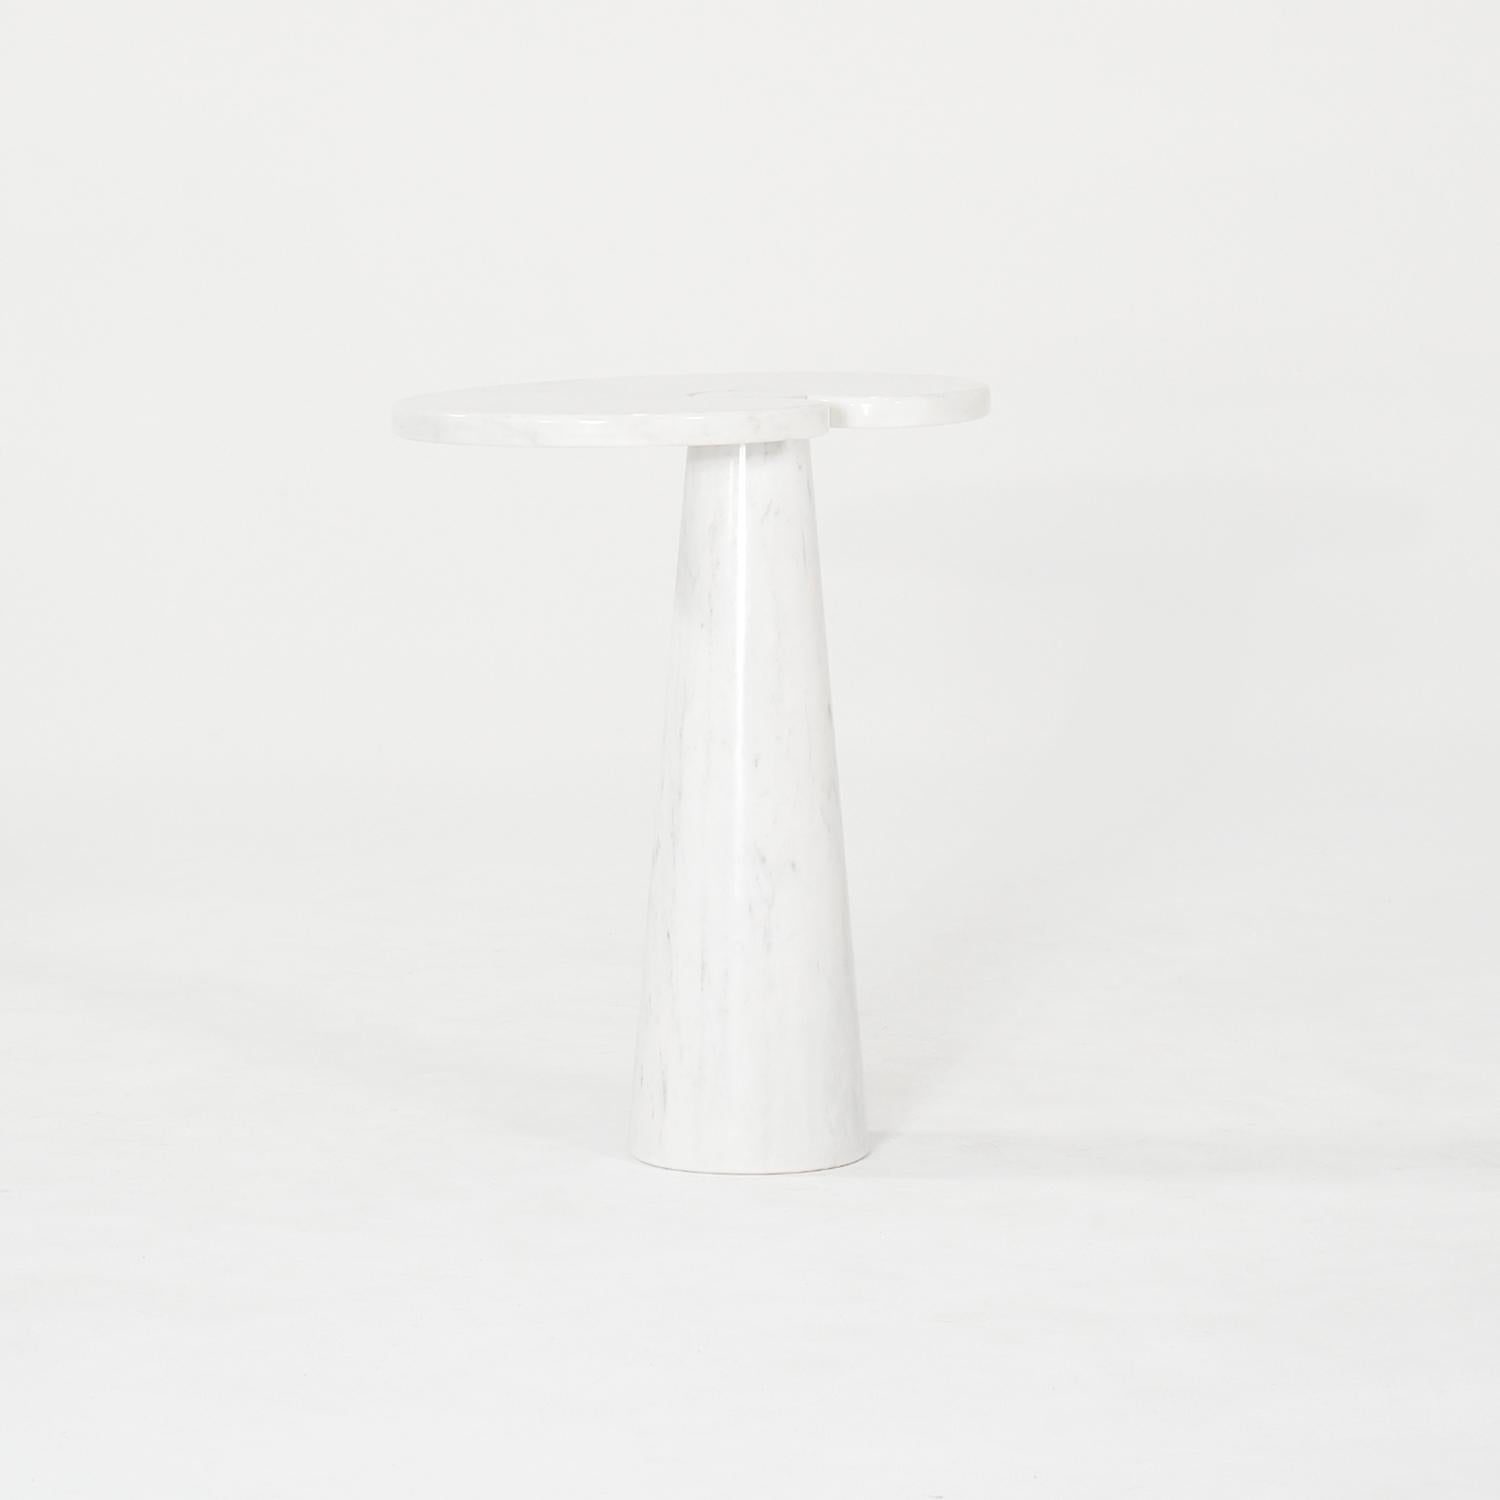 Hand-Crafted 20th Century Italian Pair of Marble Side Tables by Angelo Mangiarotti & Skipper For Sale